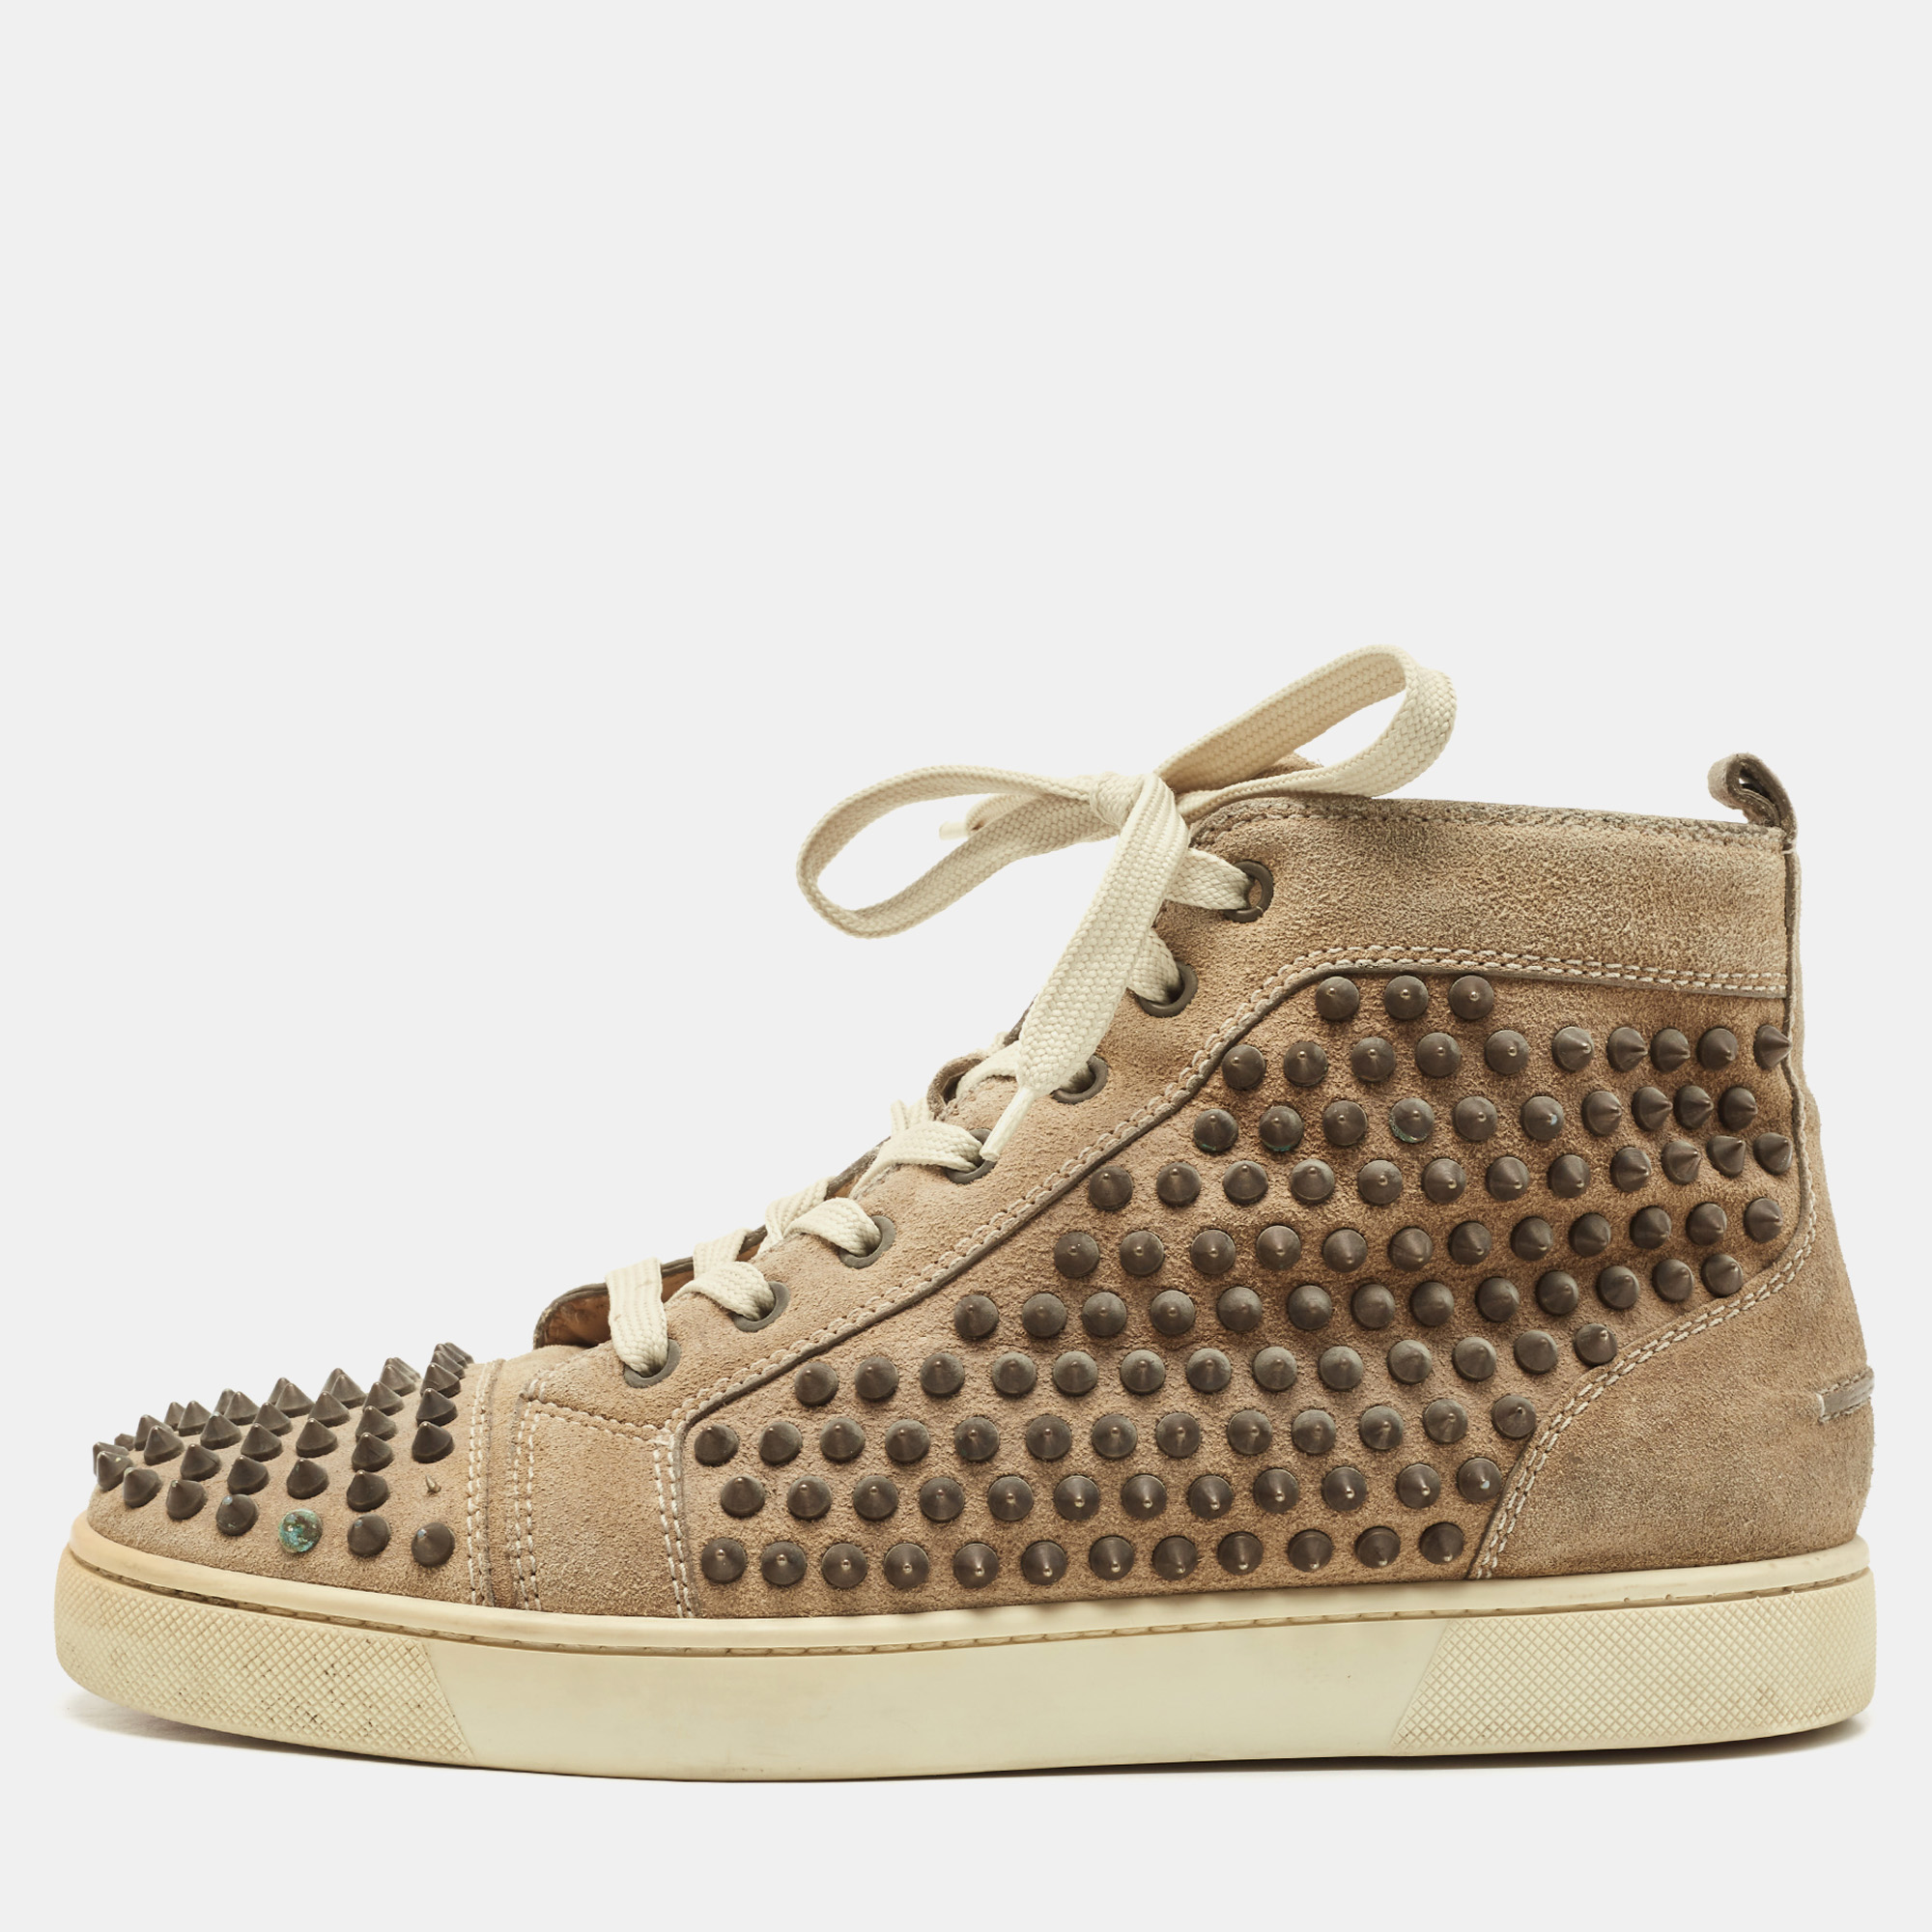 Pre-owned Christian Louboutin Brown Suede Spike High Top Sneakers Size 41